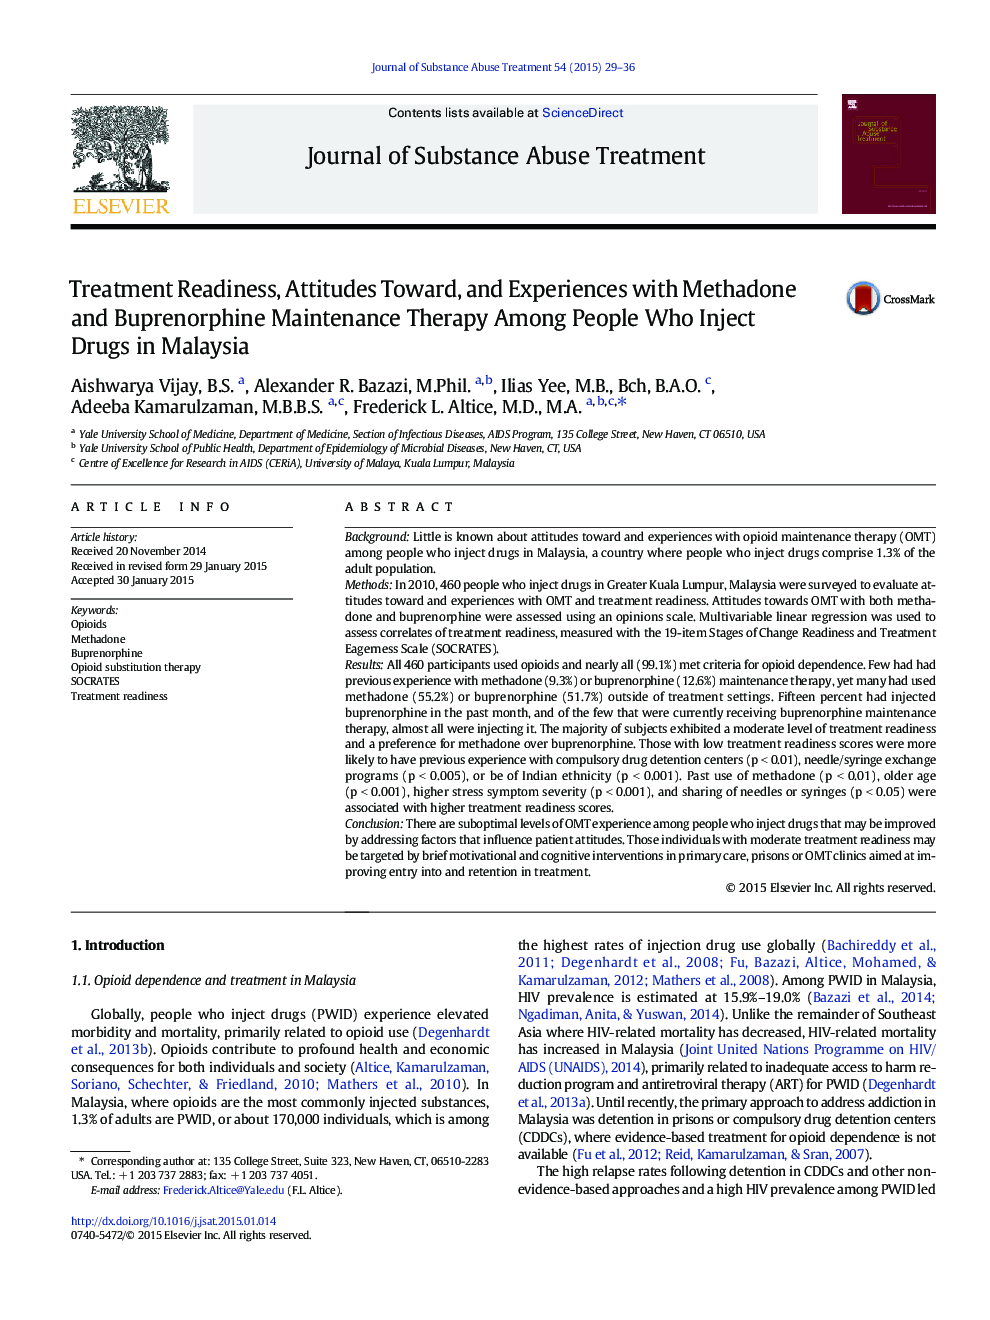 Treatment Readiness, Attitudes Toward, and Experiences with Methadone and Buprenorphine Maintenance Therapy Among People Who Inject Drugs in Malaysia